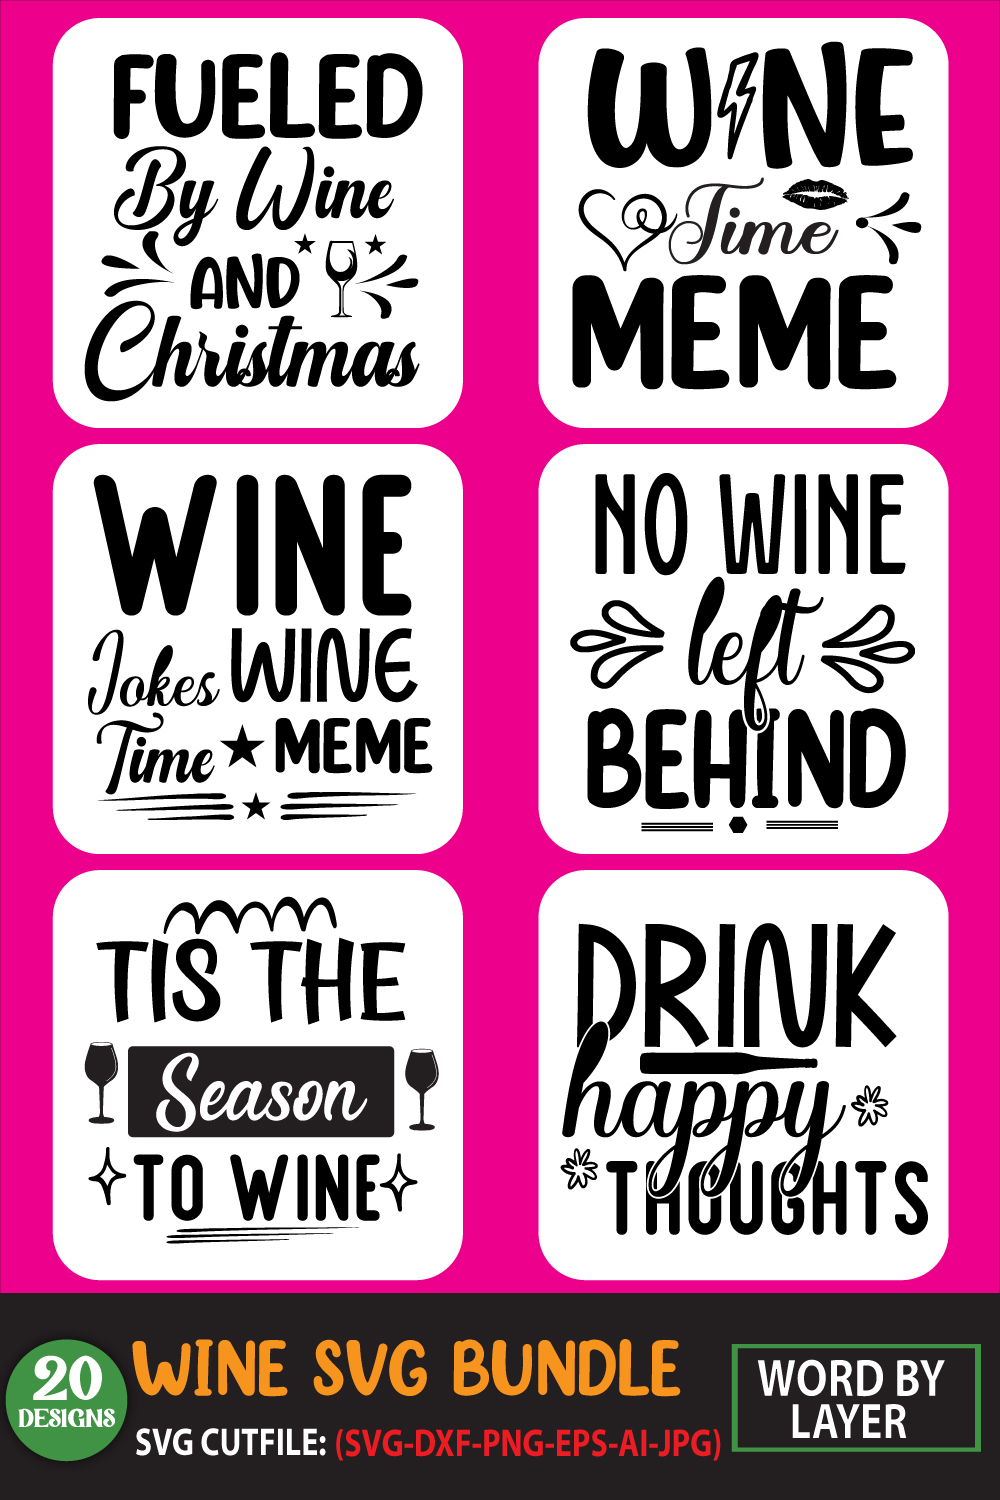 A collection of amazing images for prints on the theme of wine.